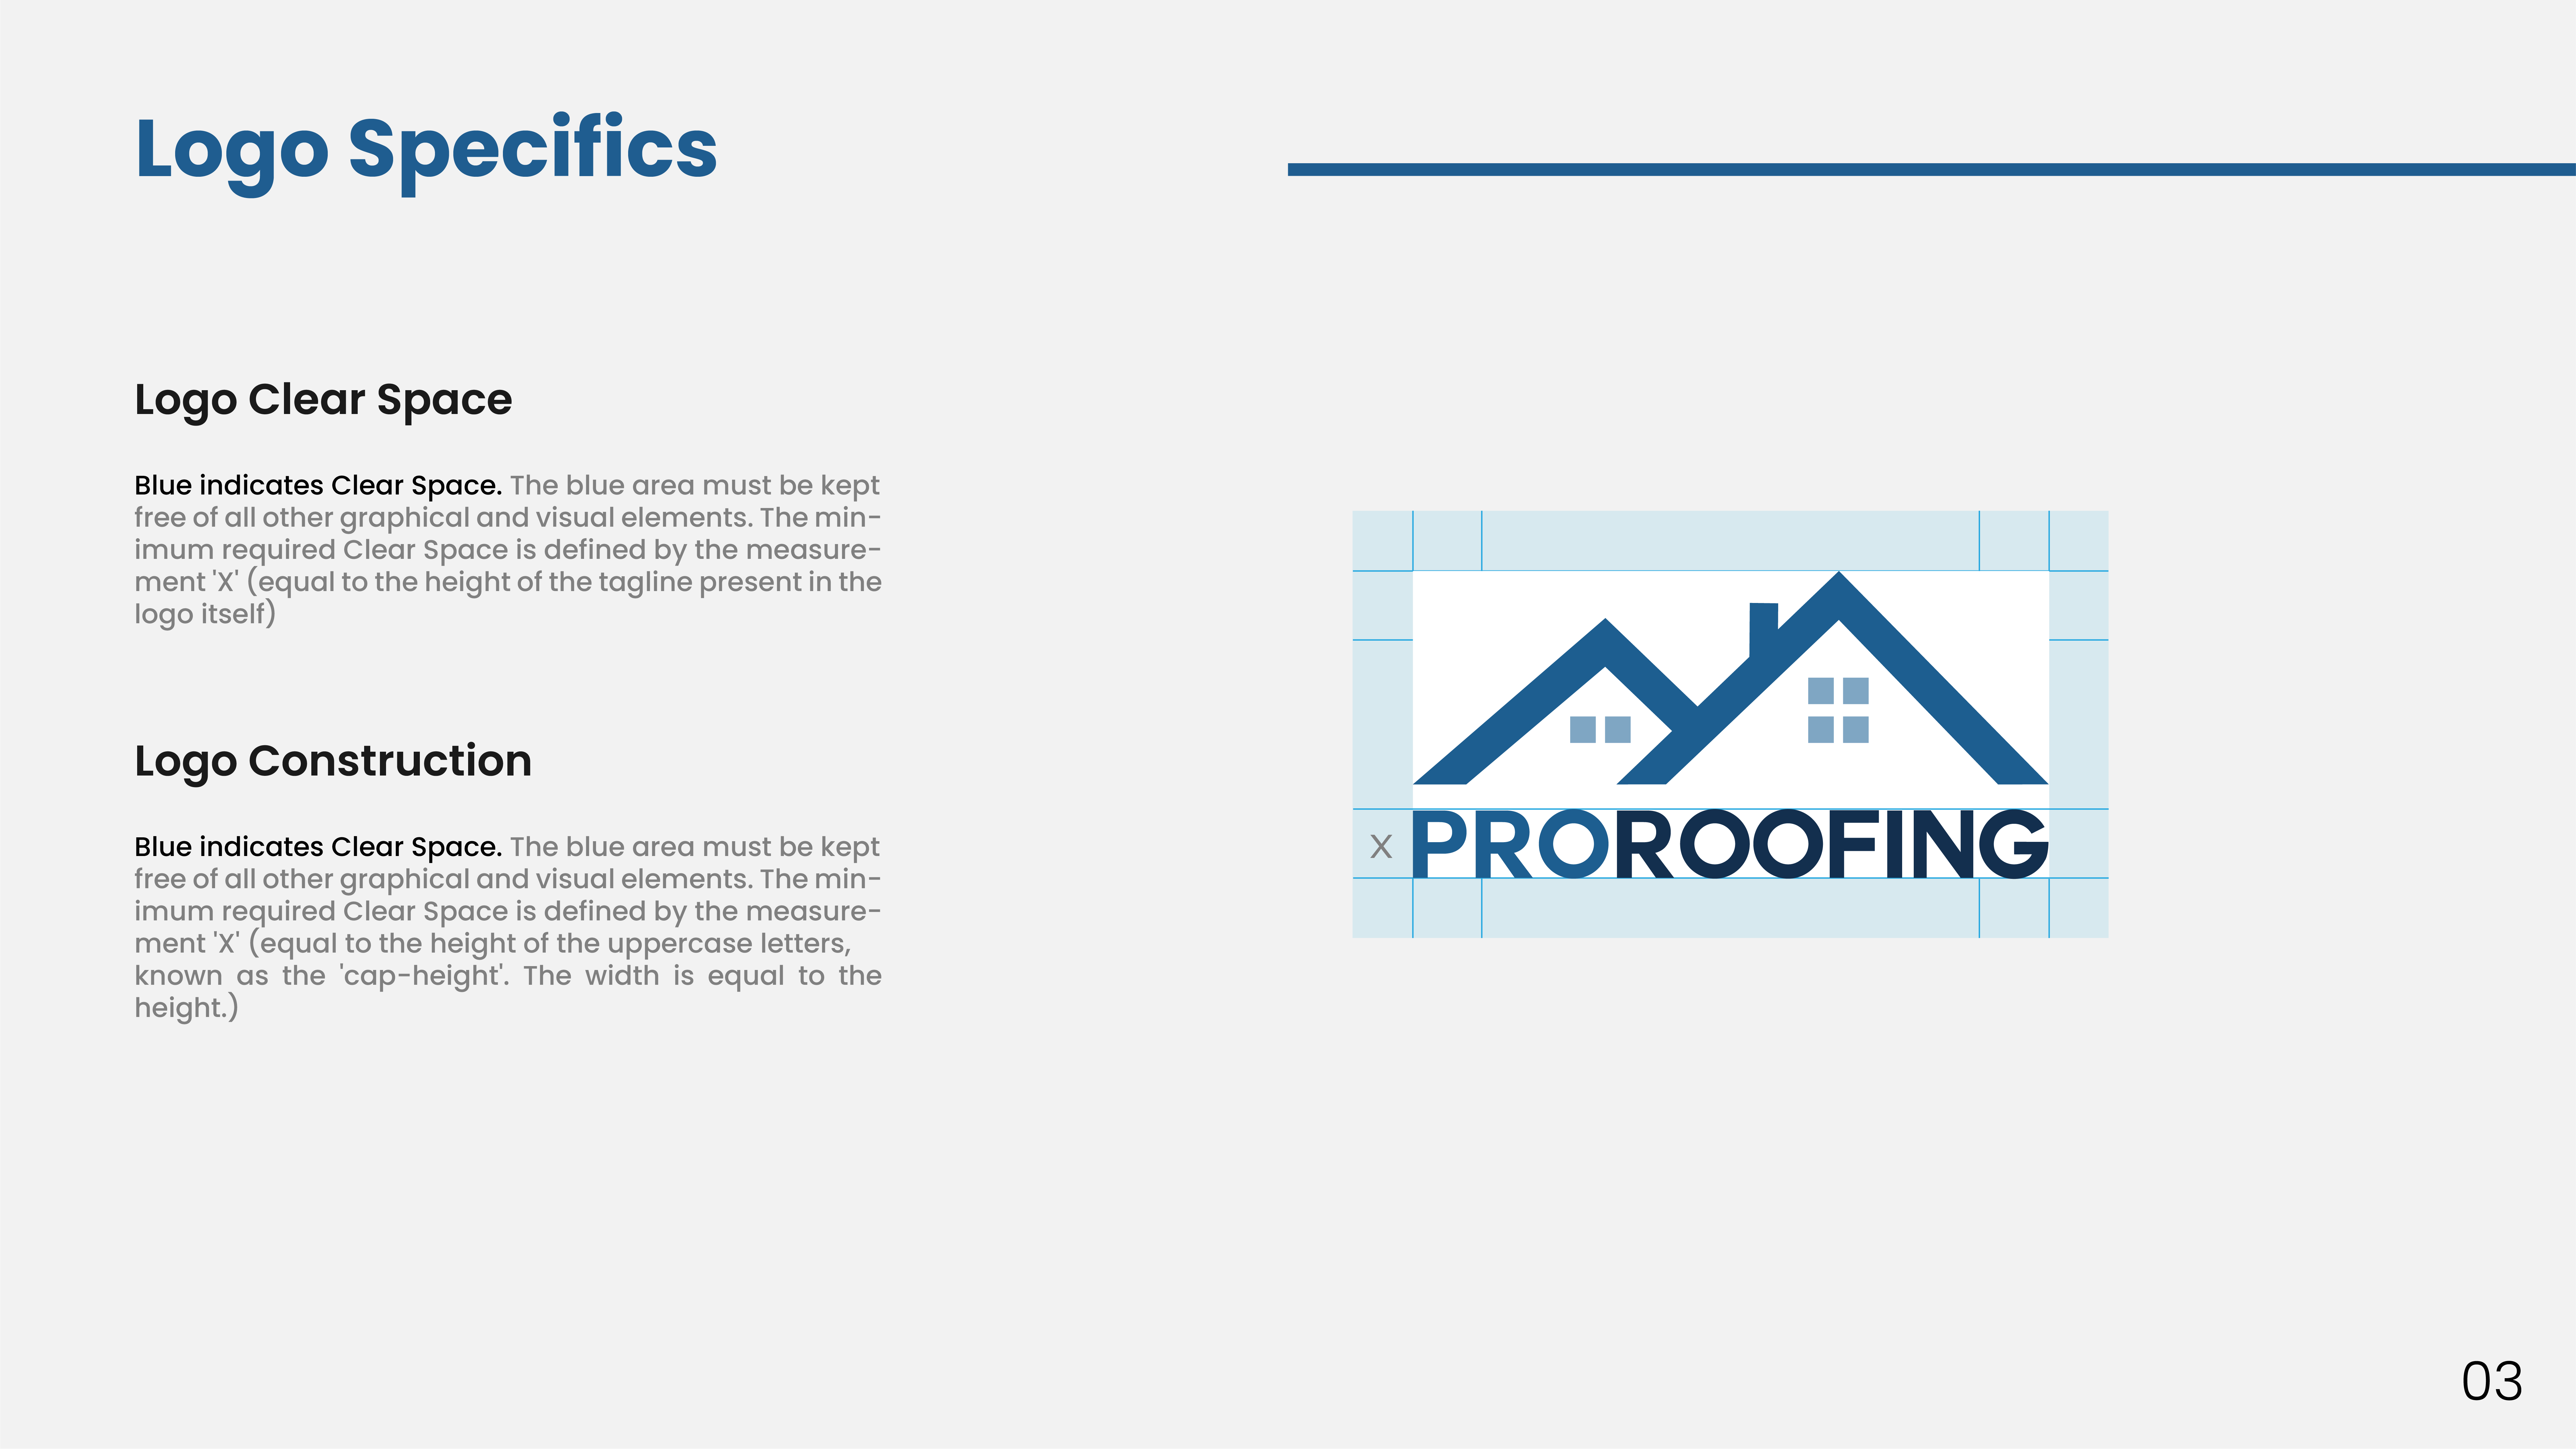 Pro Roofing - Pro roofing Brand Guidelines 05 - New Minds Group